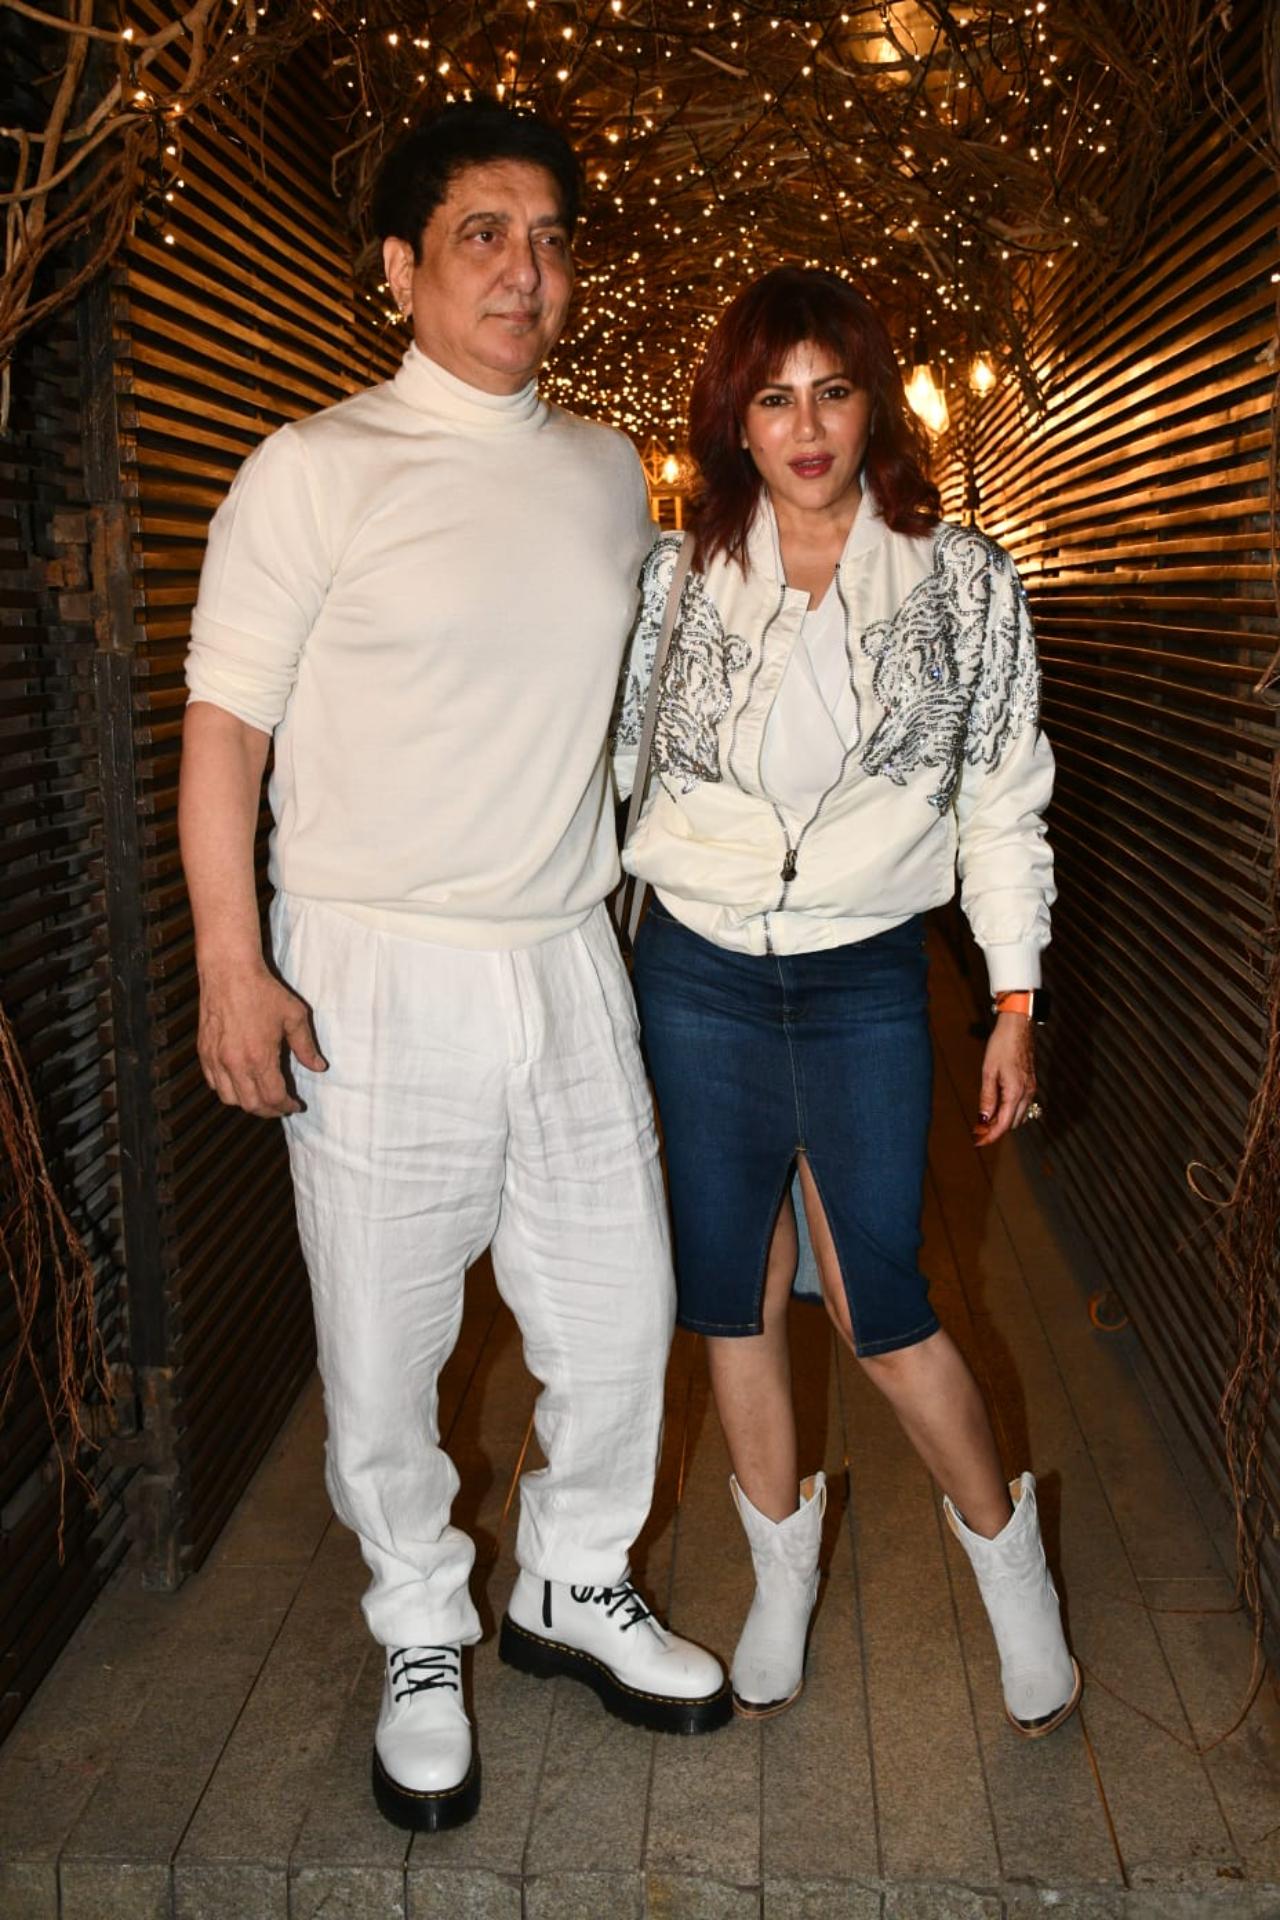 Sajid Nadiadwala and Warda Nadiadwala twinned in white while sticking to the theme. The ace producer has signed Kartik for two of his upcoming films